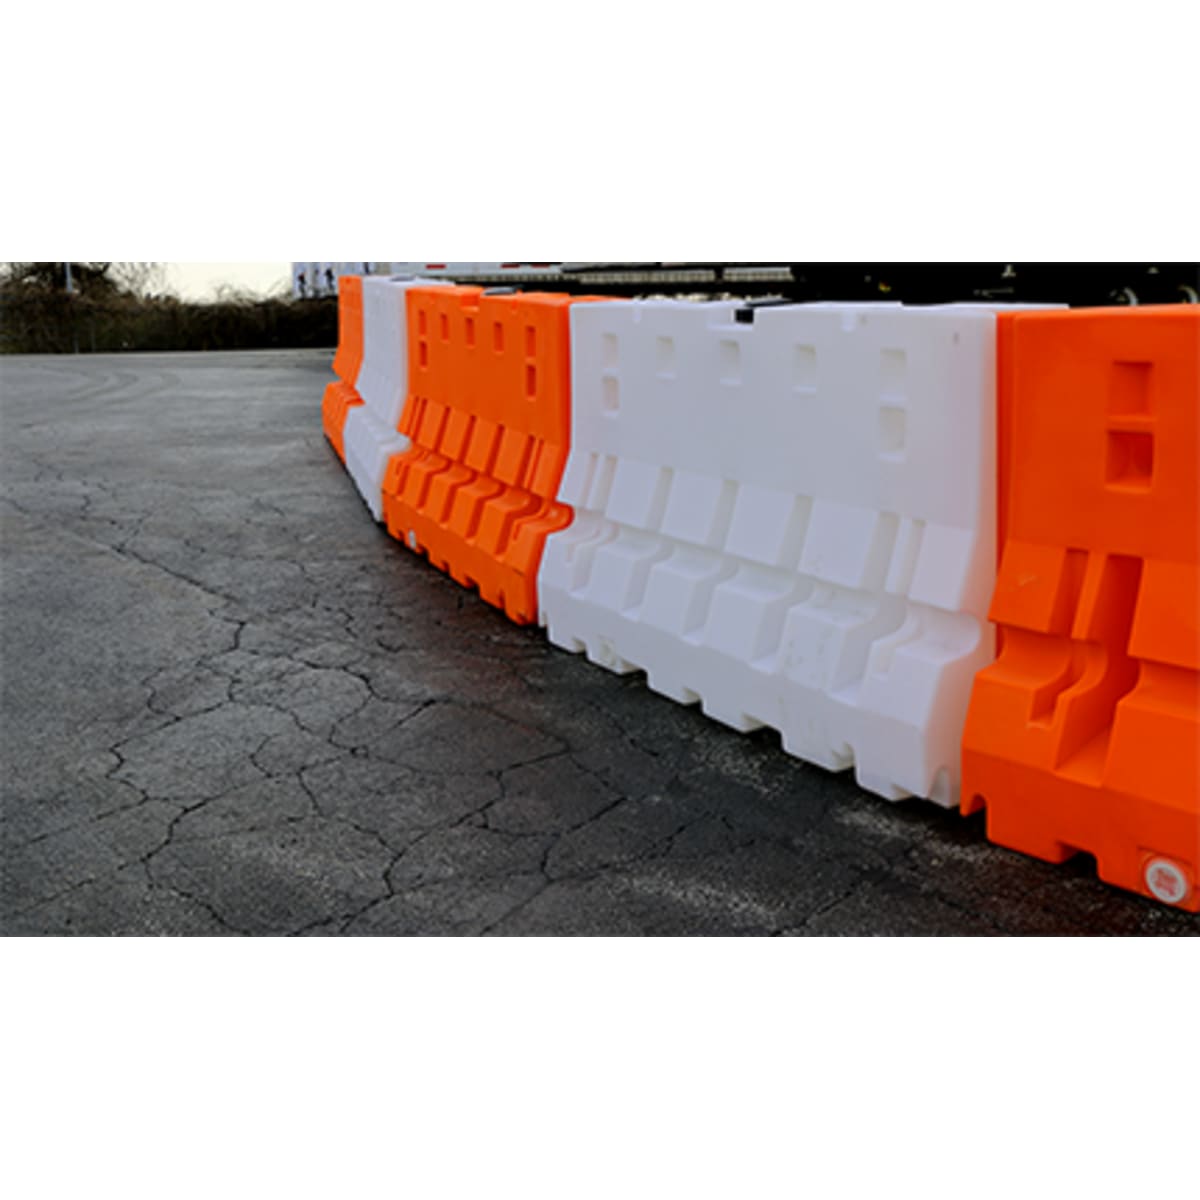 2-Way Yellow Reflectivity 16 Concrete Barrier Wall Delineator for Low-Profile Concrete Barrier 1